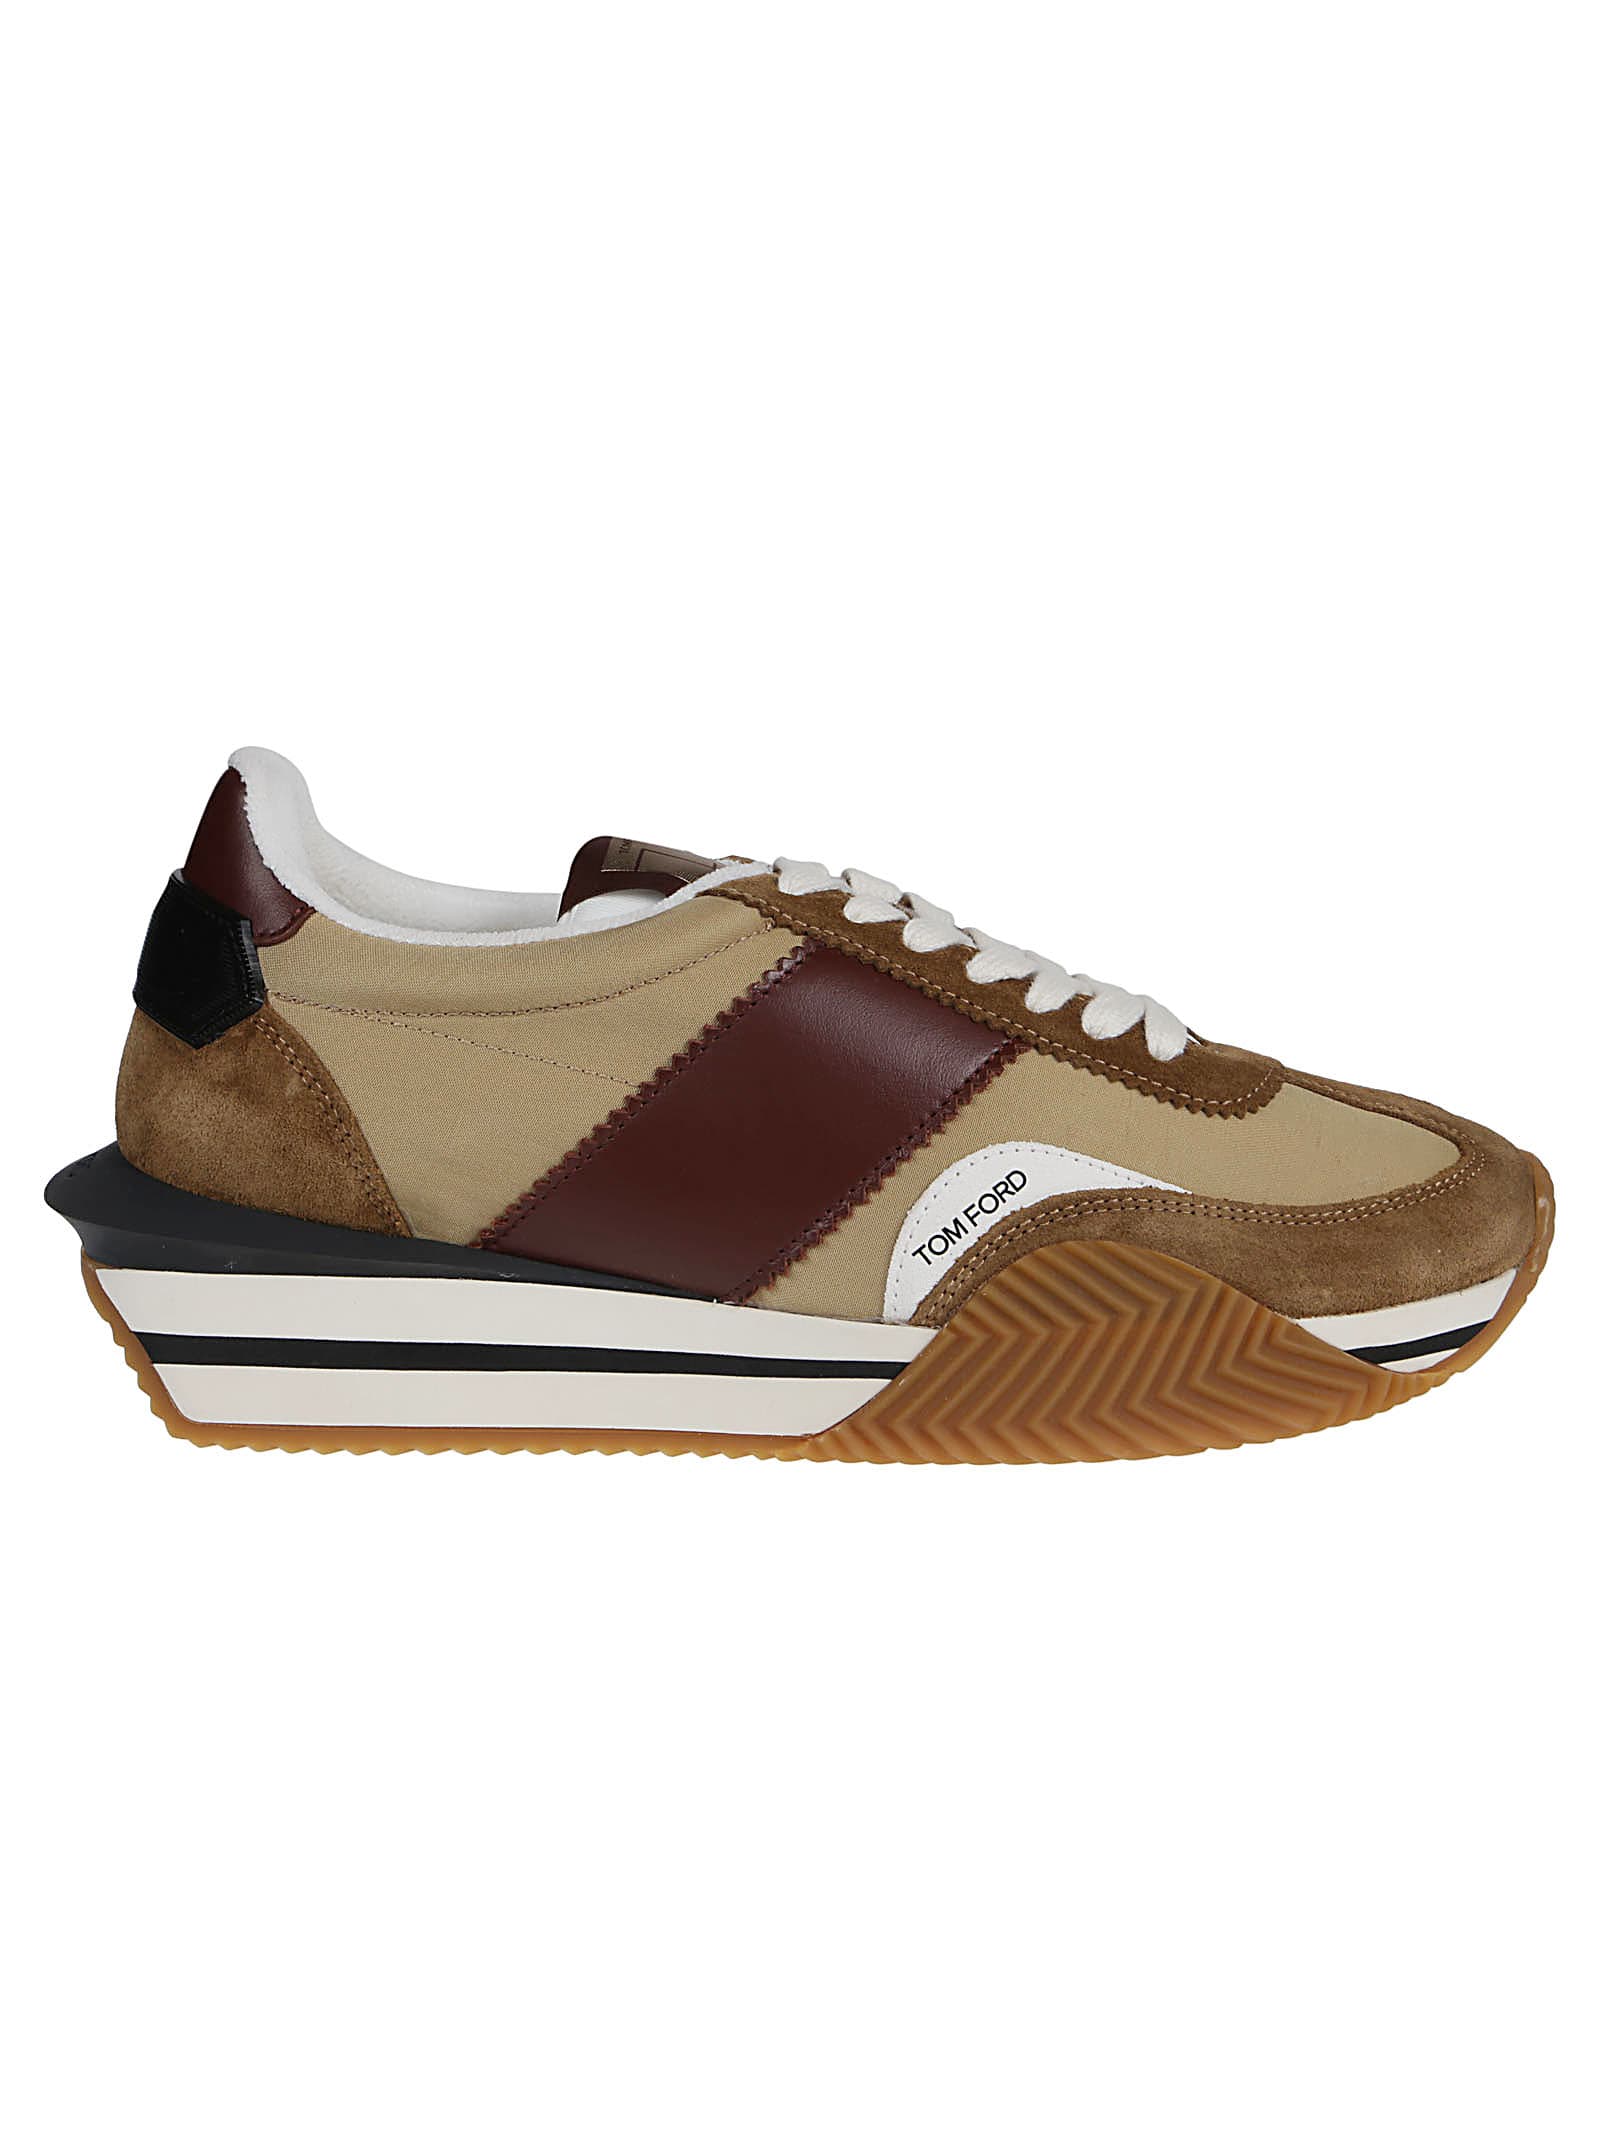 TOM FORD JAMES LOW TOP SNEAKERS